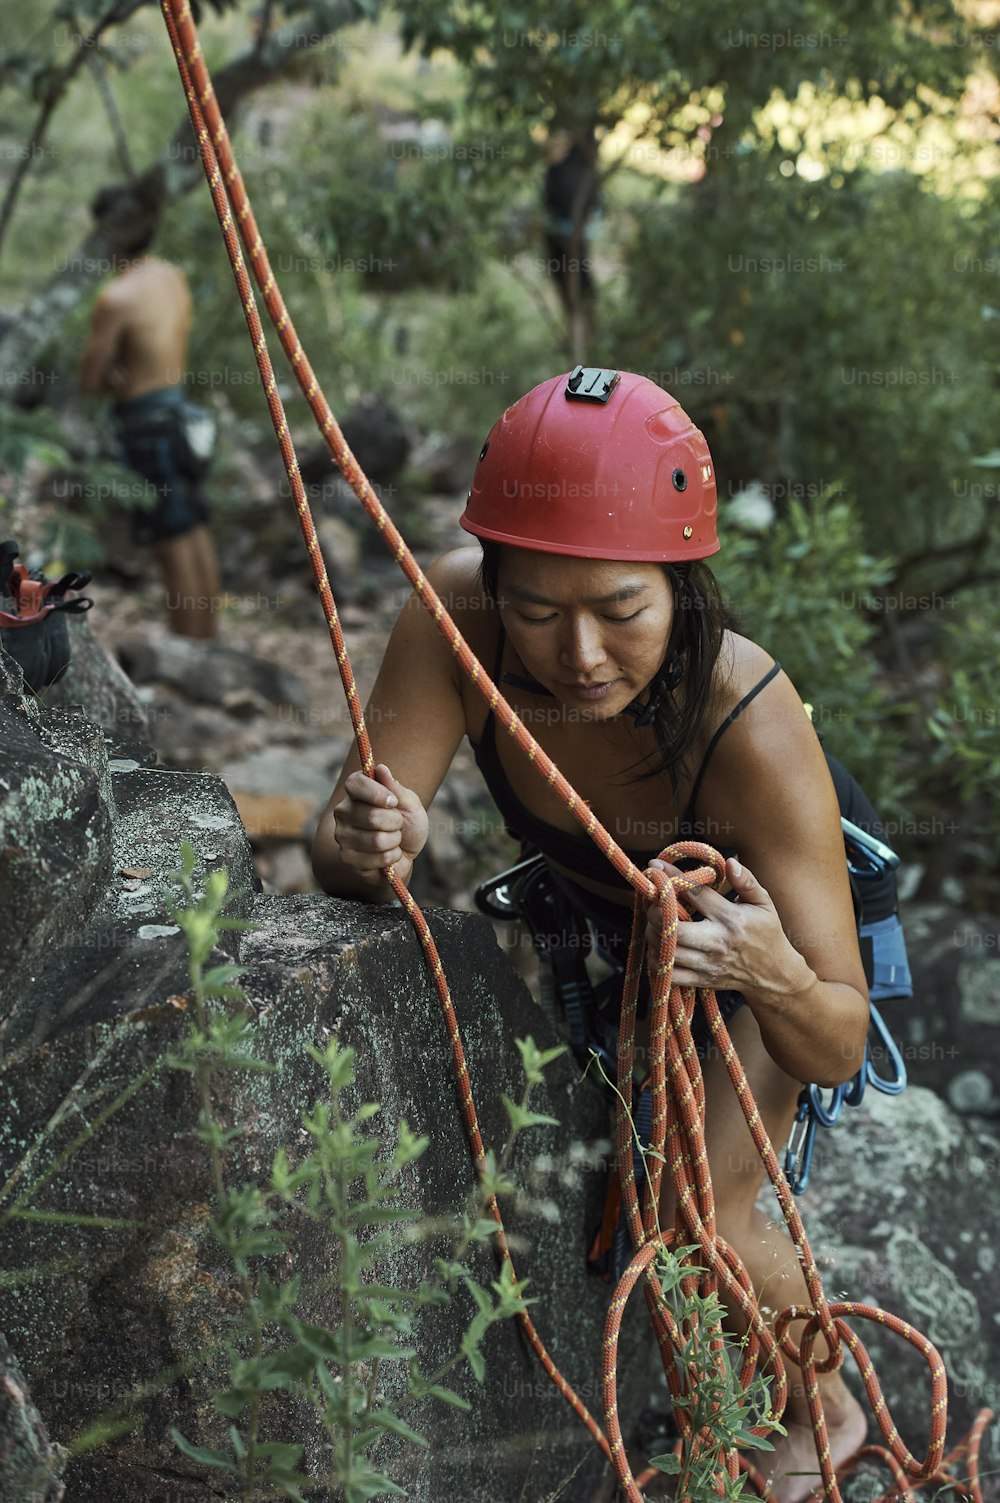 a woman climbing up a rock with a red helmet